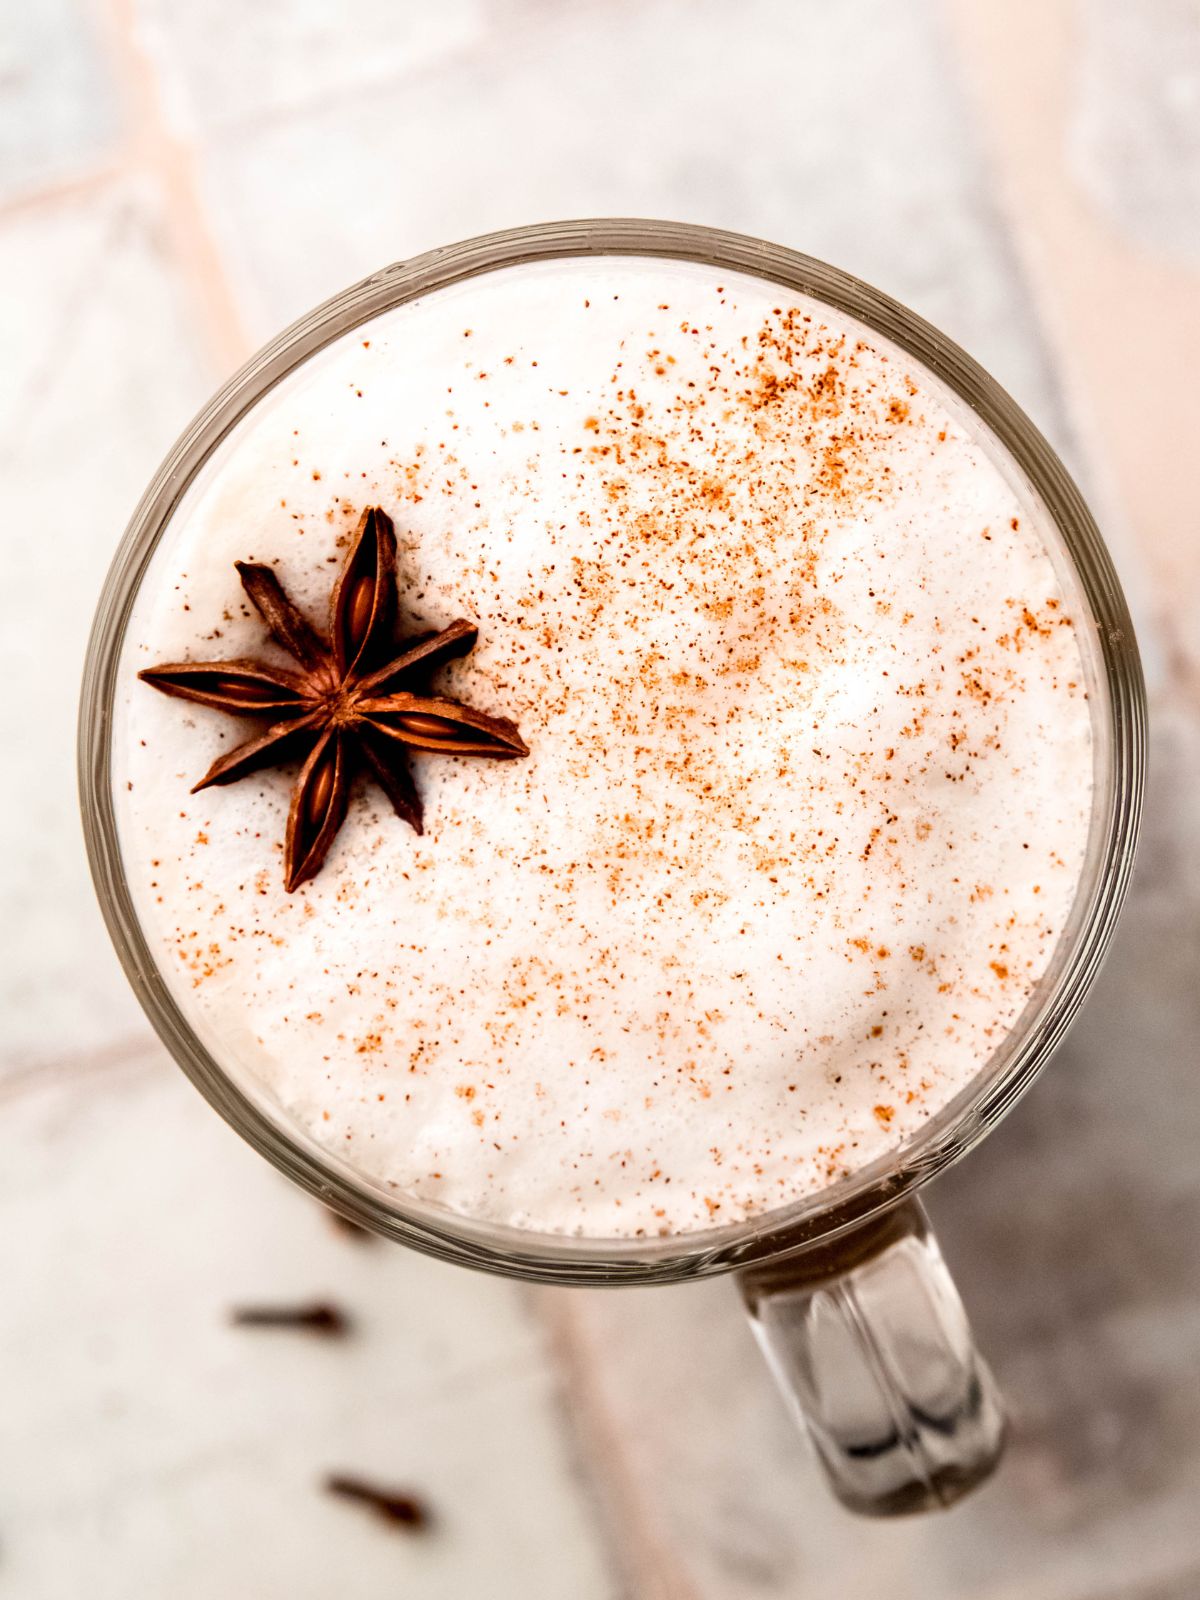 A latte with cinnamon and star anise.